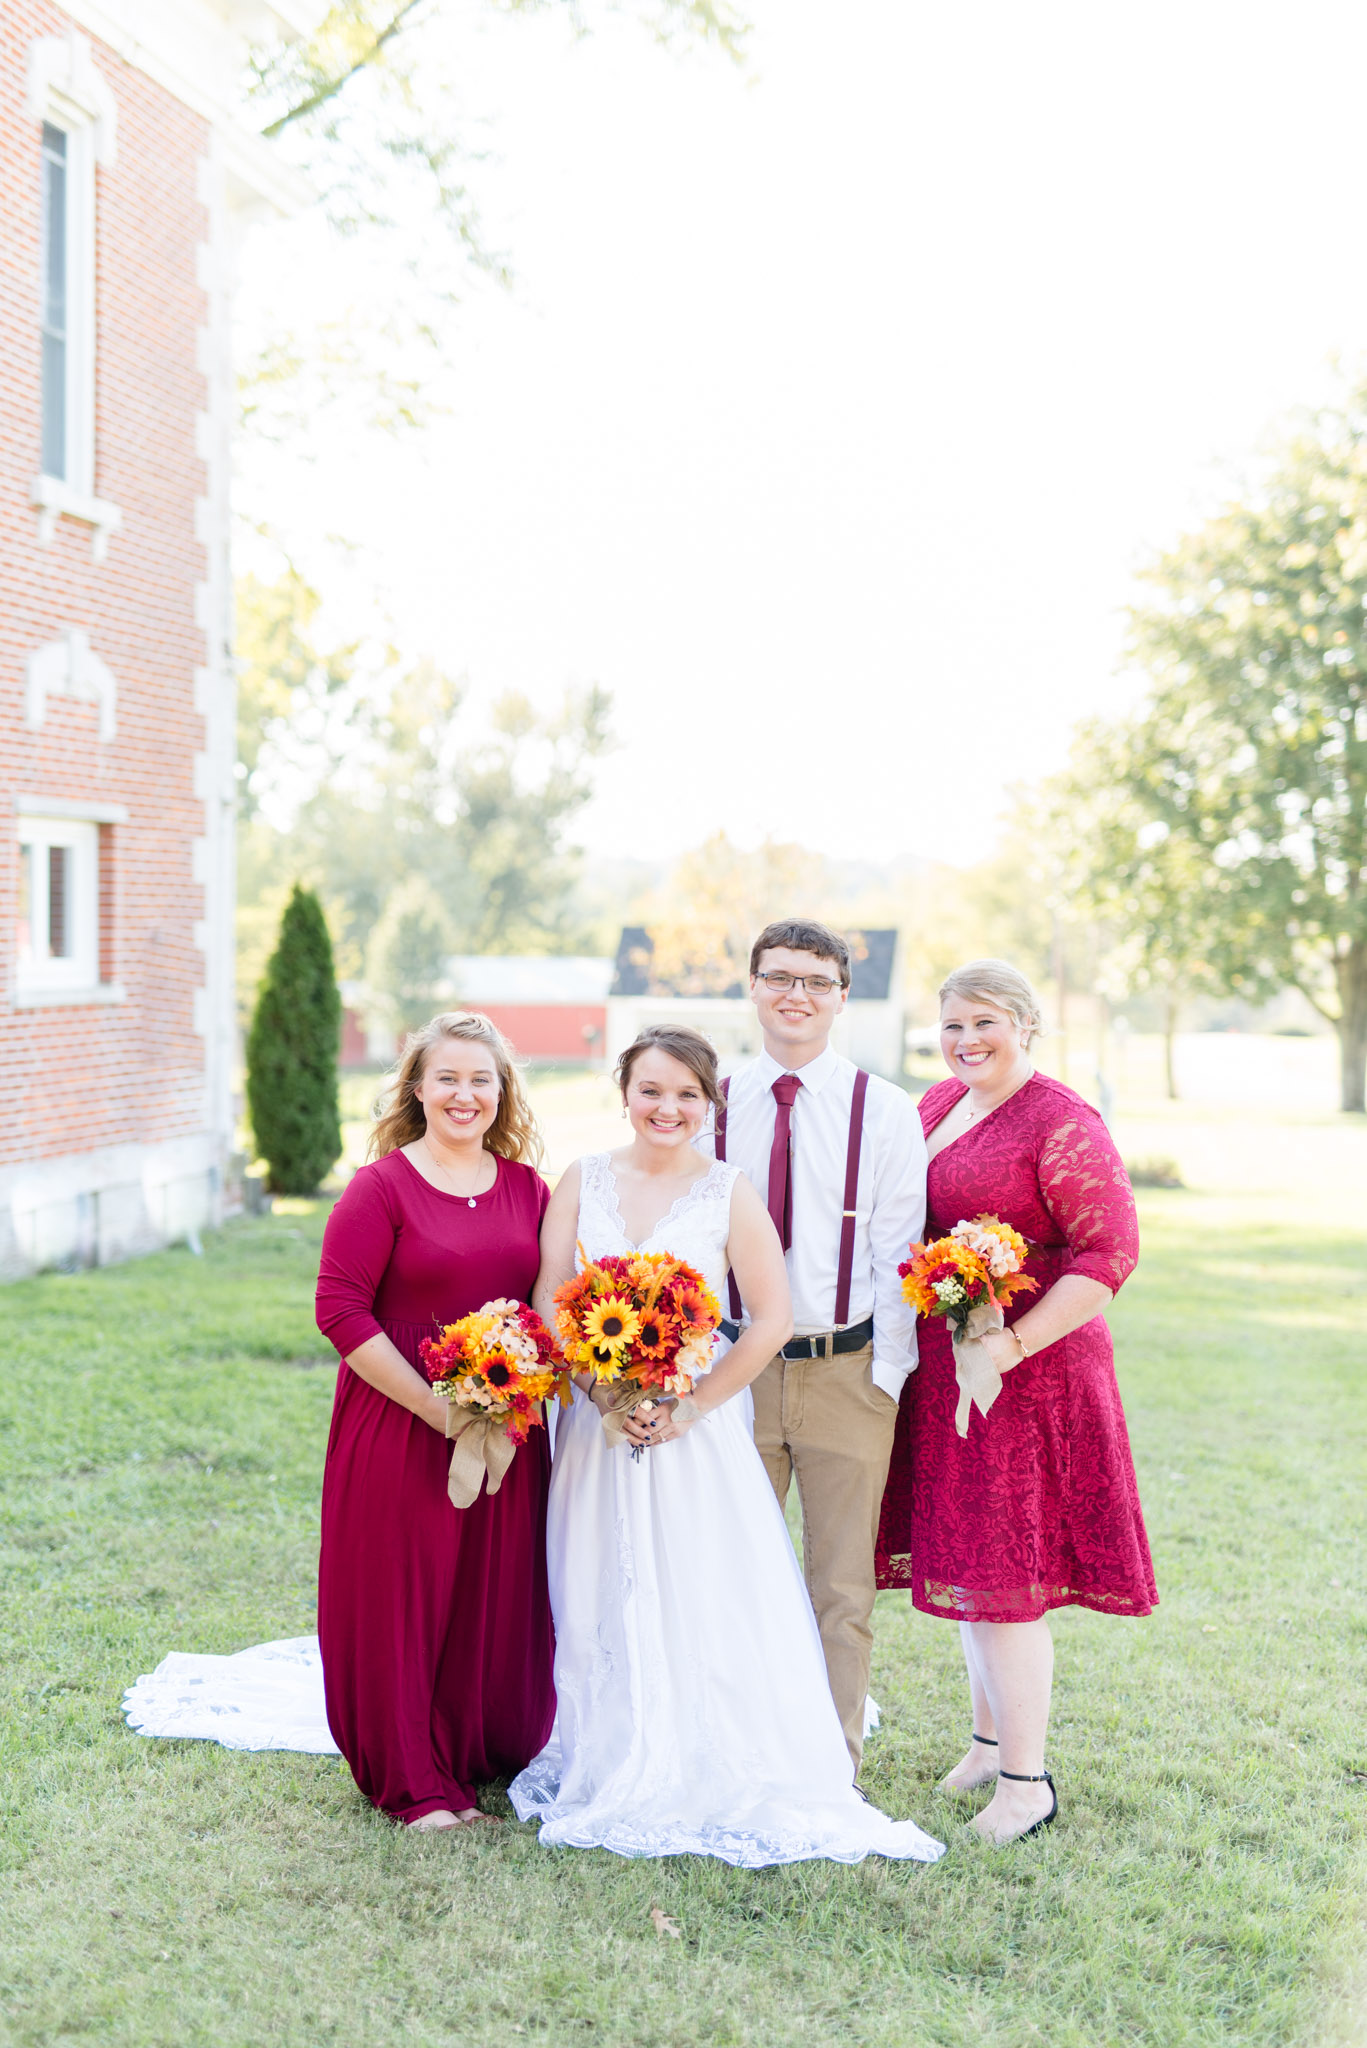 Bridal Party Smiles at Camera while Dressed in Burgundy